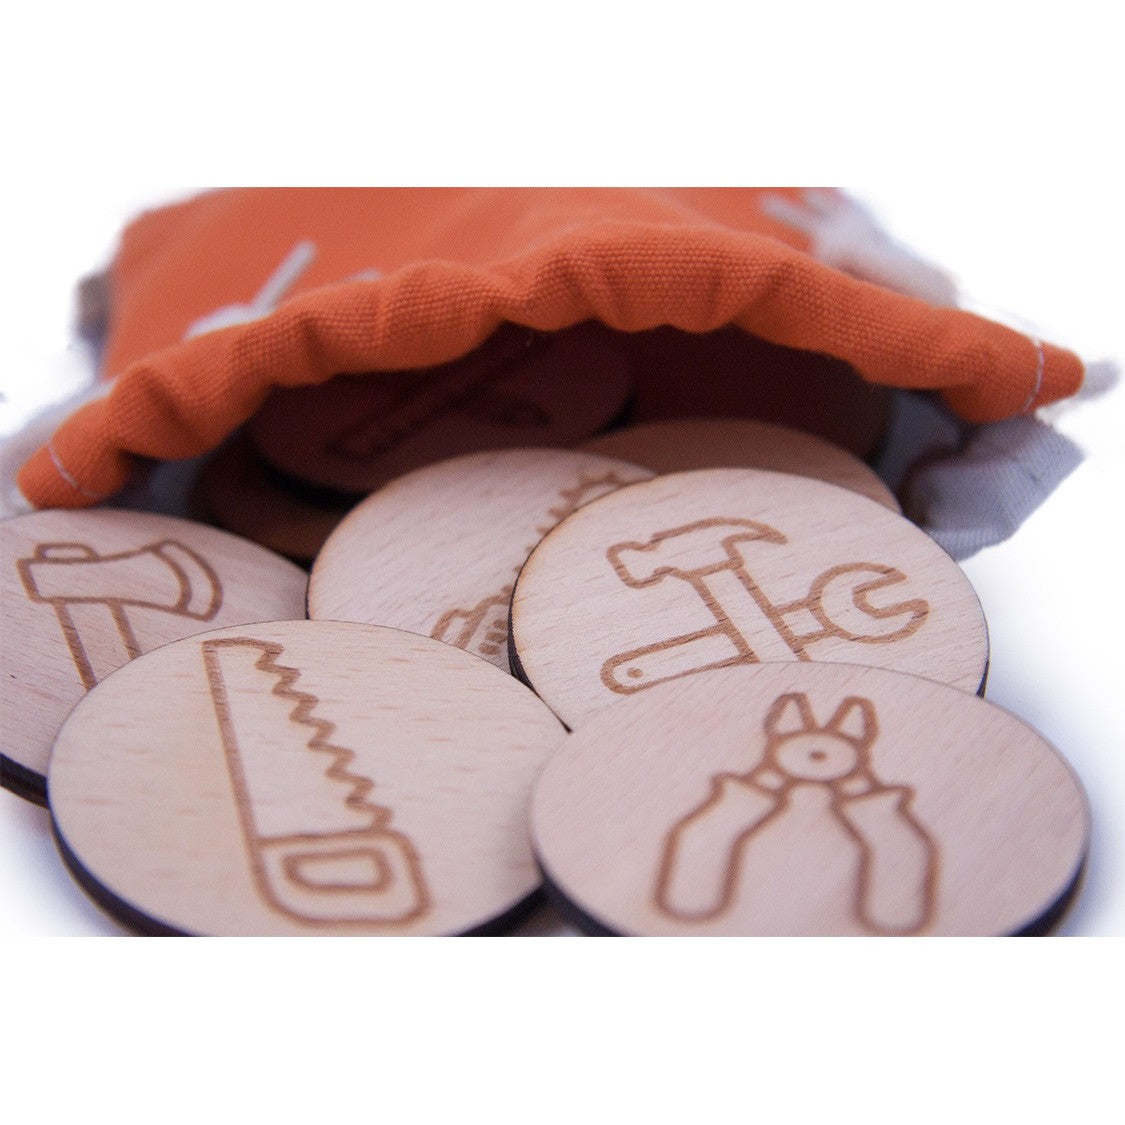 Wooden Memory Game Tools Edition by Grains.be, choose your color of your bag